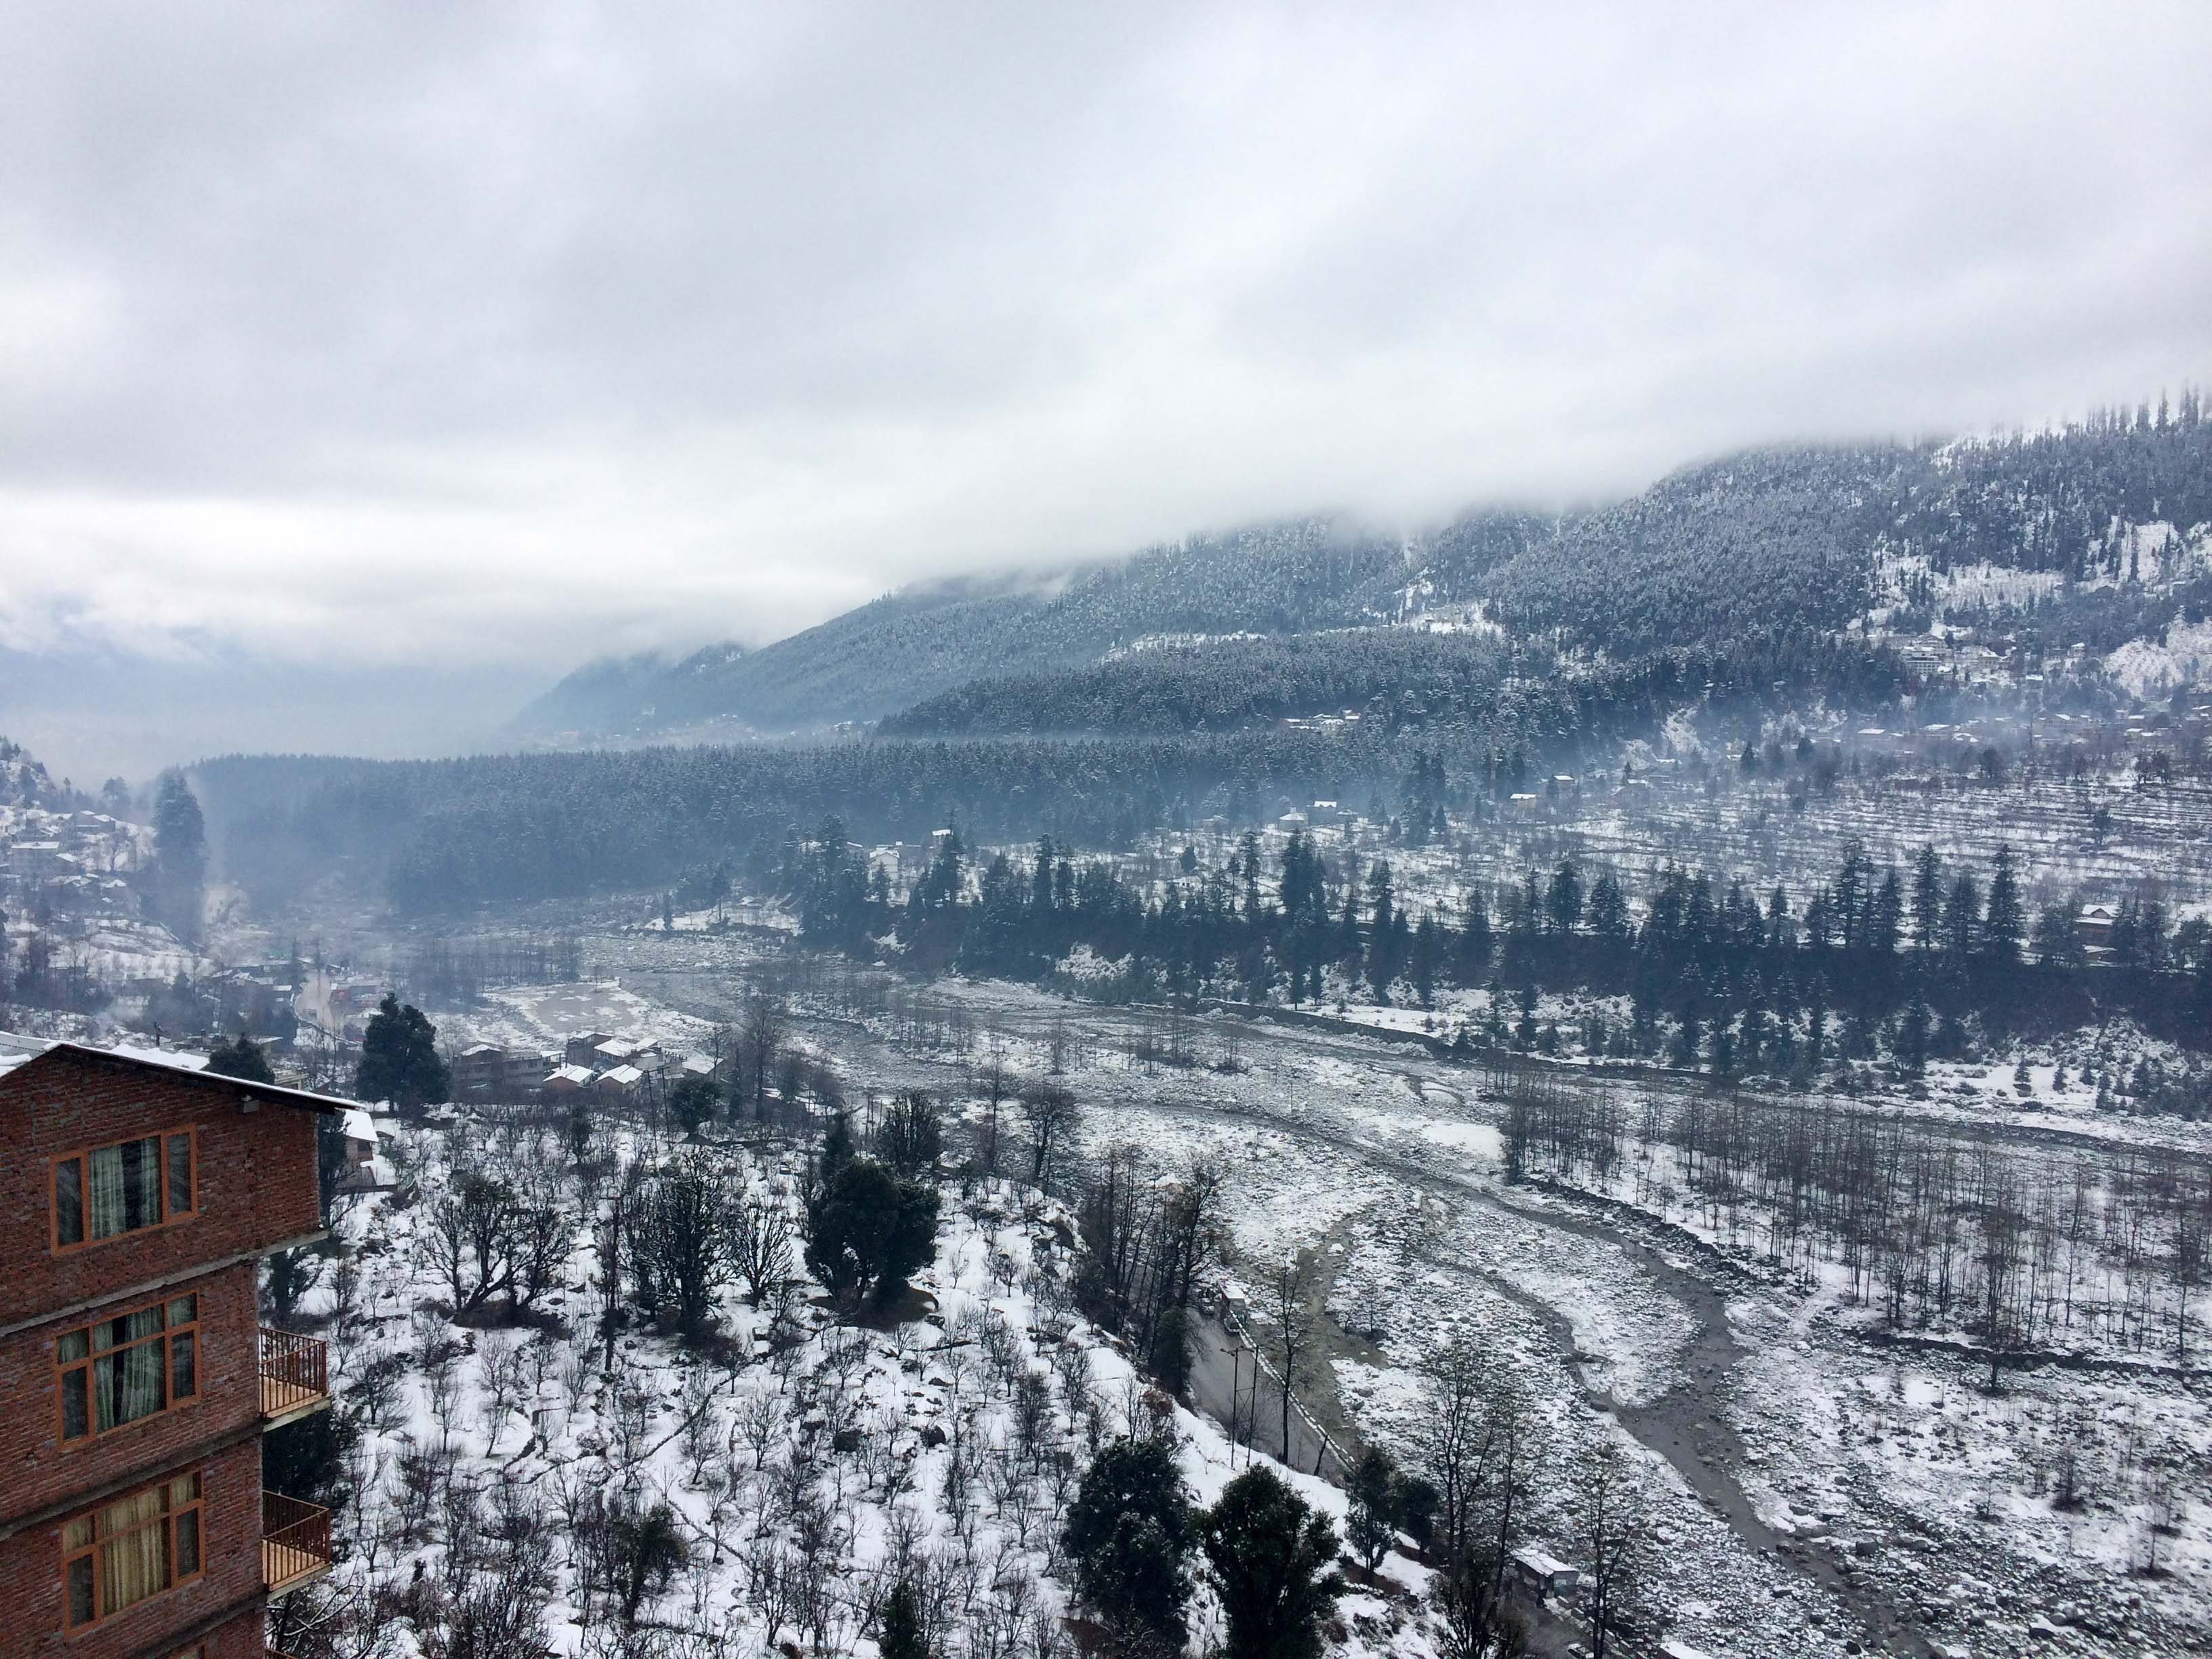 Reminiscences from a two day snowfall in Manali